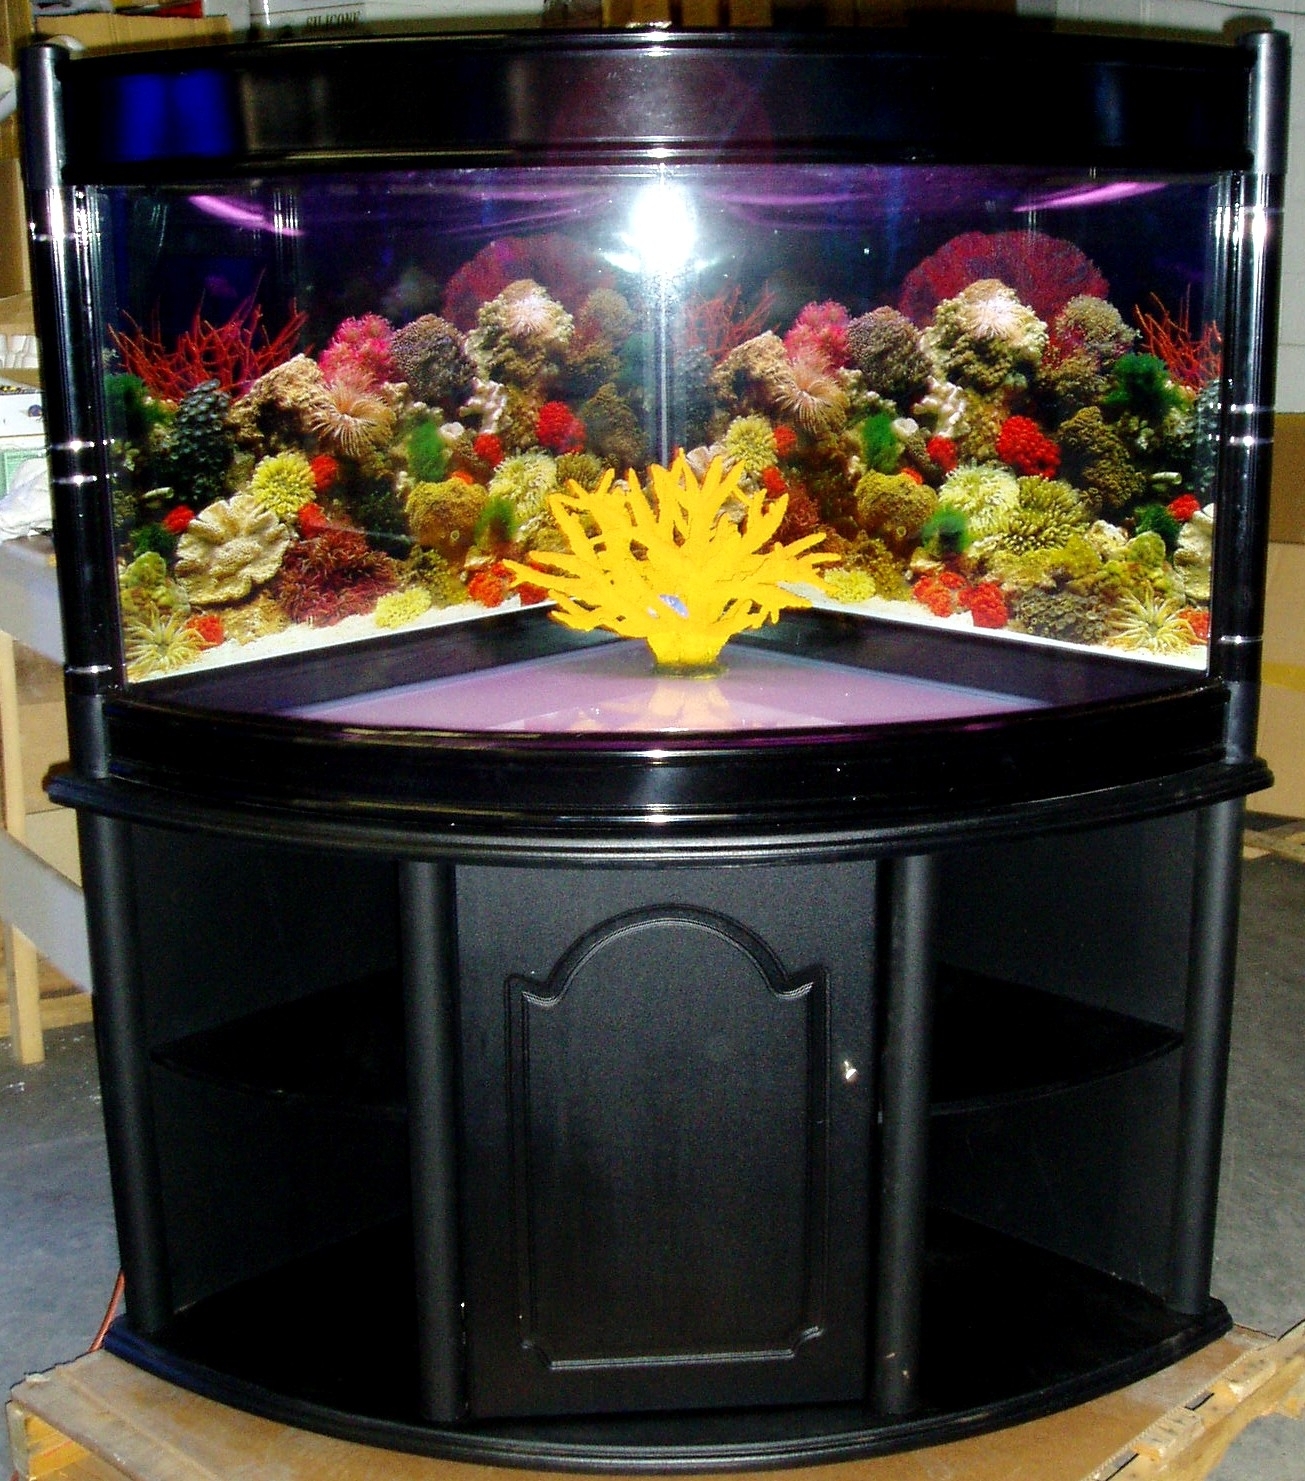 30 Gallon Gold Fish Tank And Stand - Fish Included for Sale in